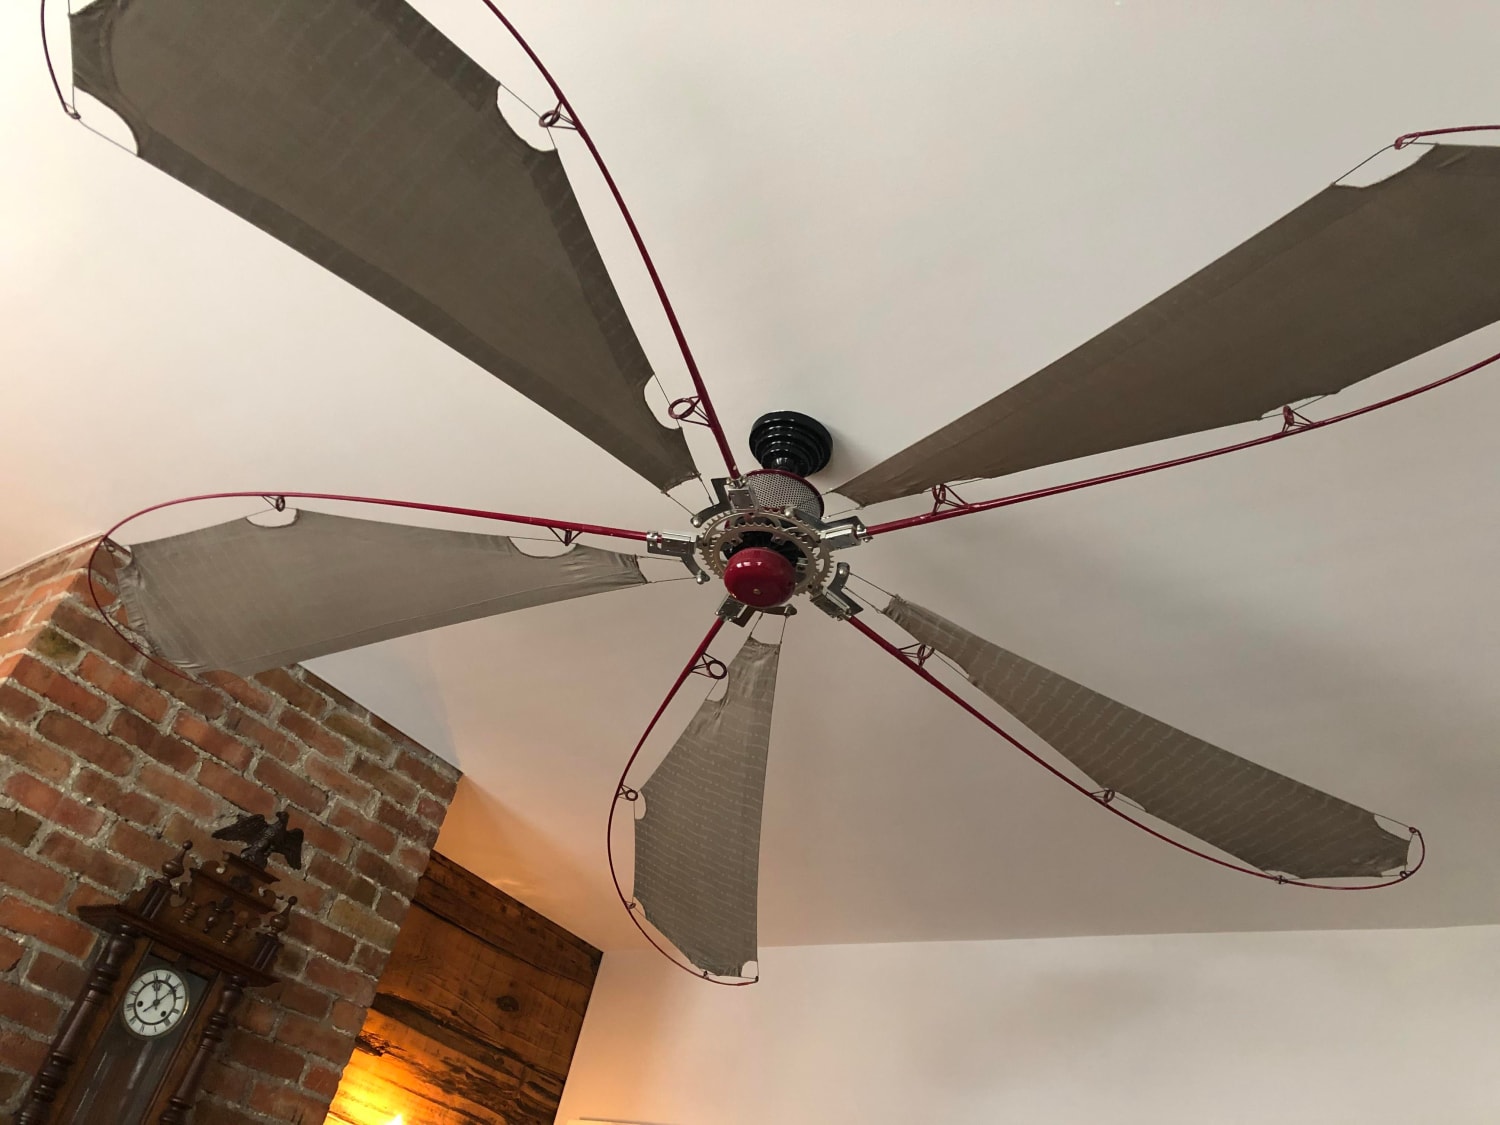 Fan made from fishing poles and a bicycle sprocket